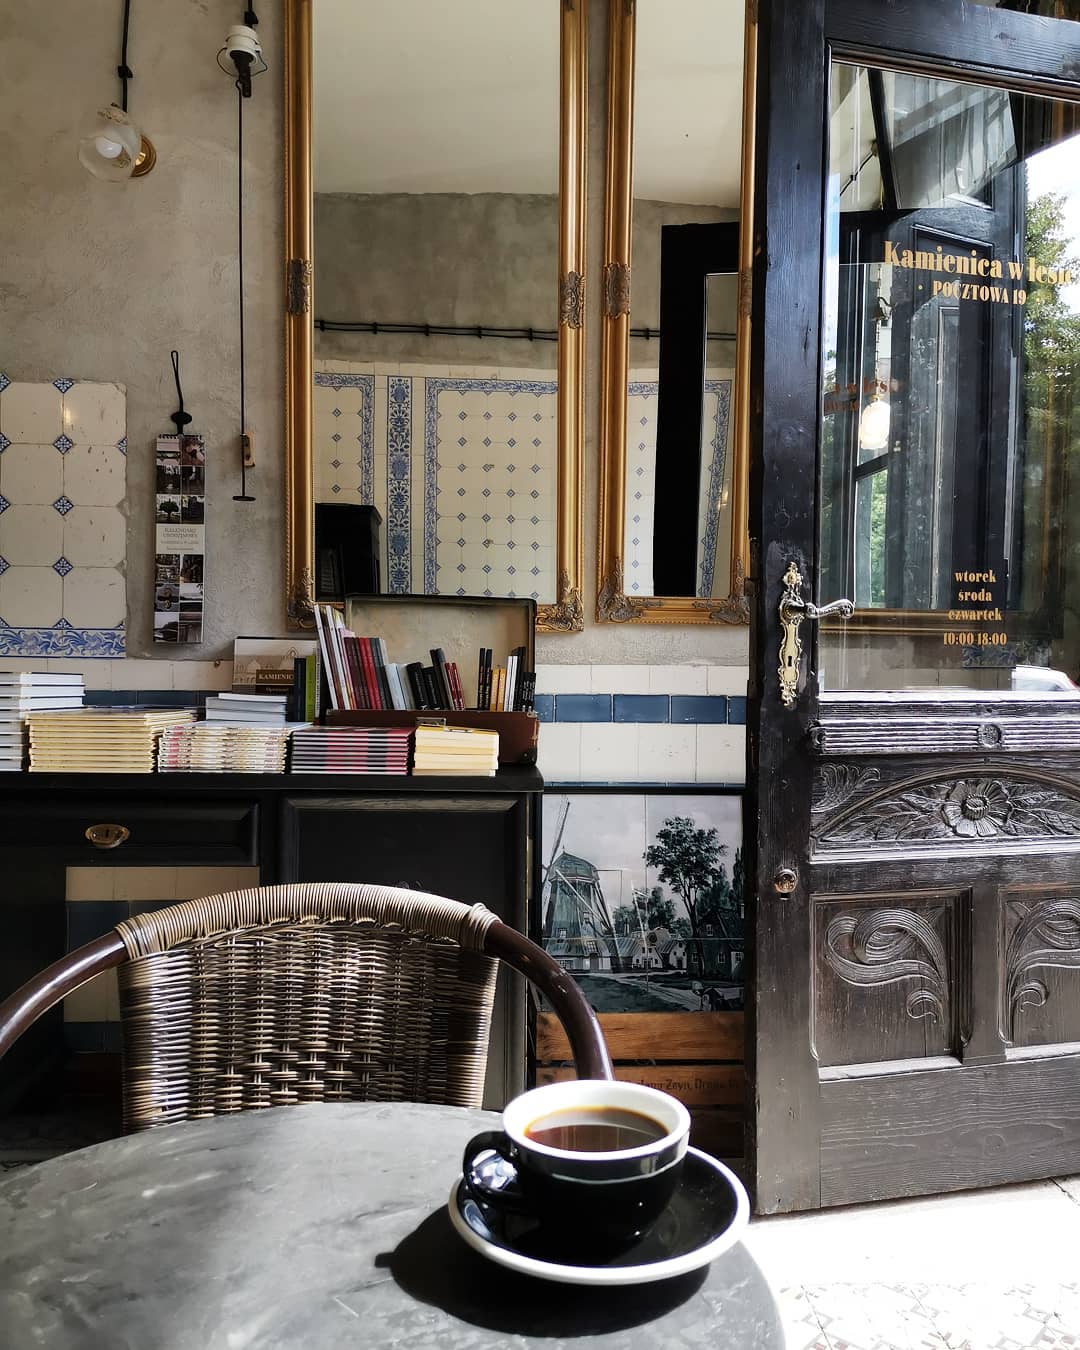 Tiled history—a place where coffee meets the past